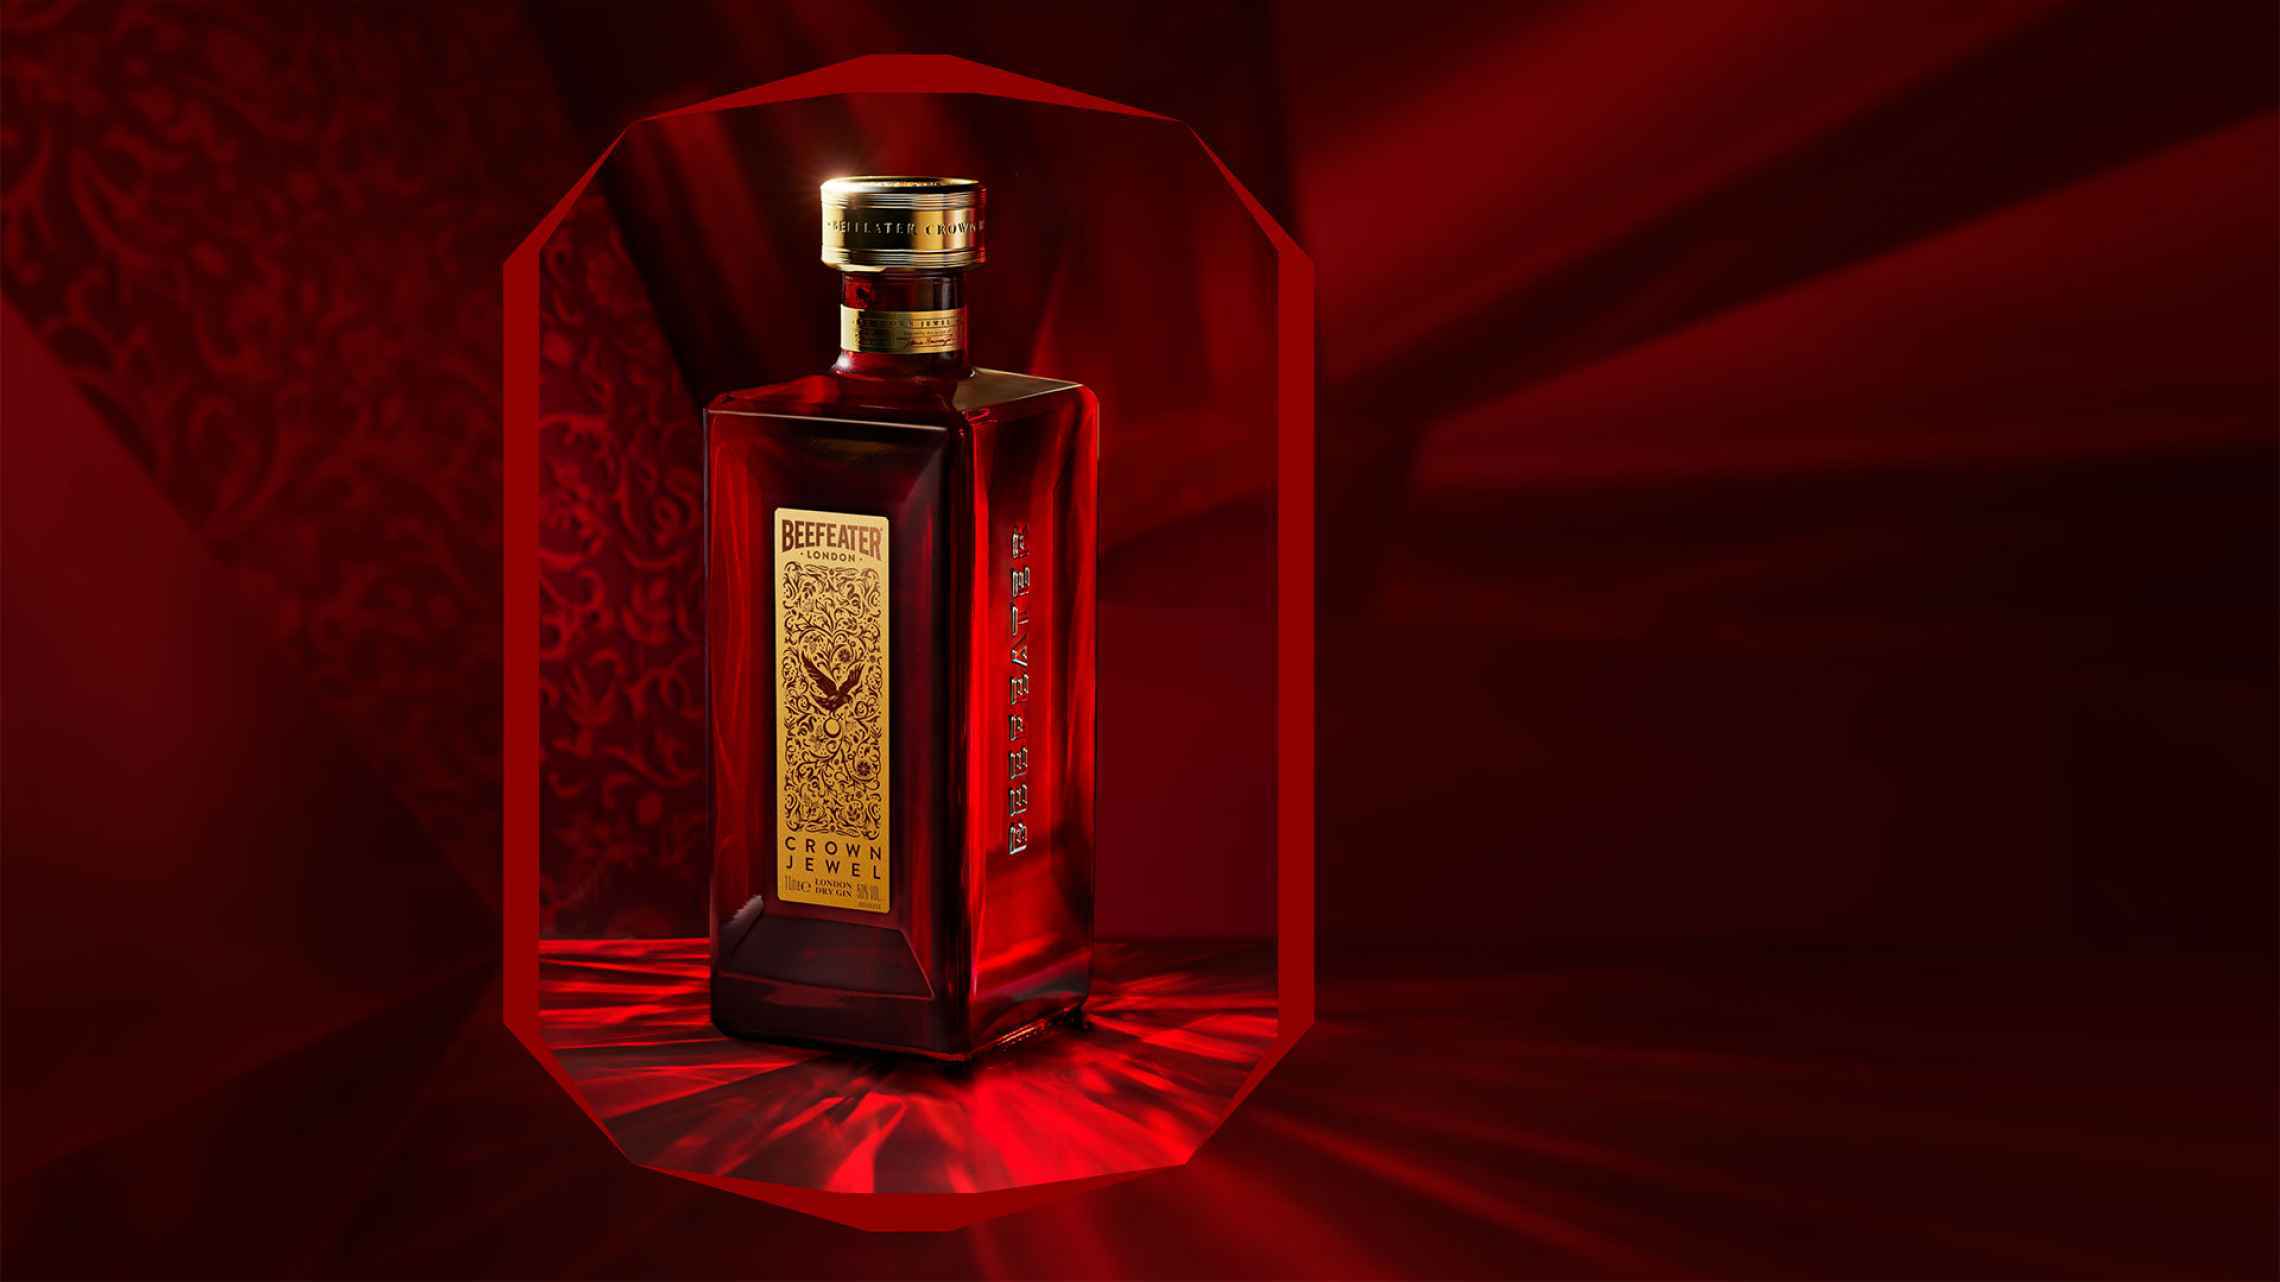 Win a bottle of Beefeater Crown Jewel | Competition | Square Mile